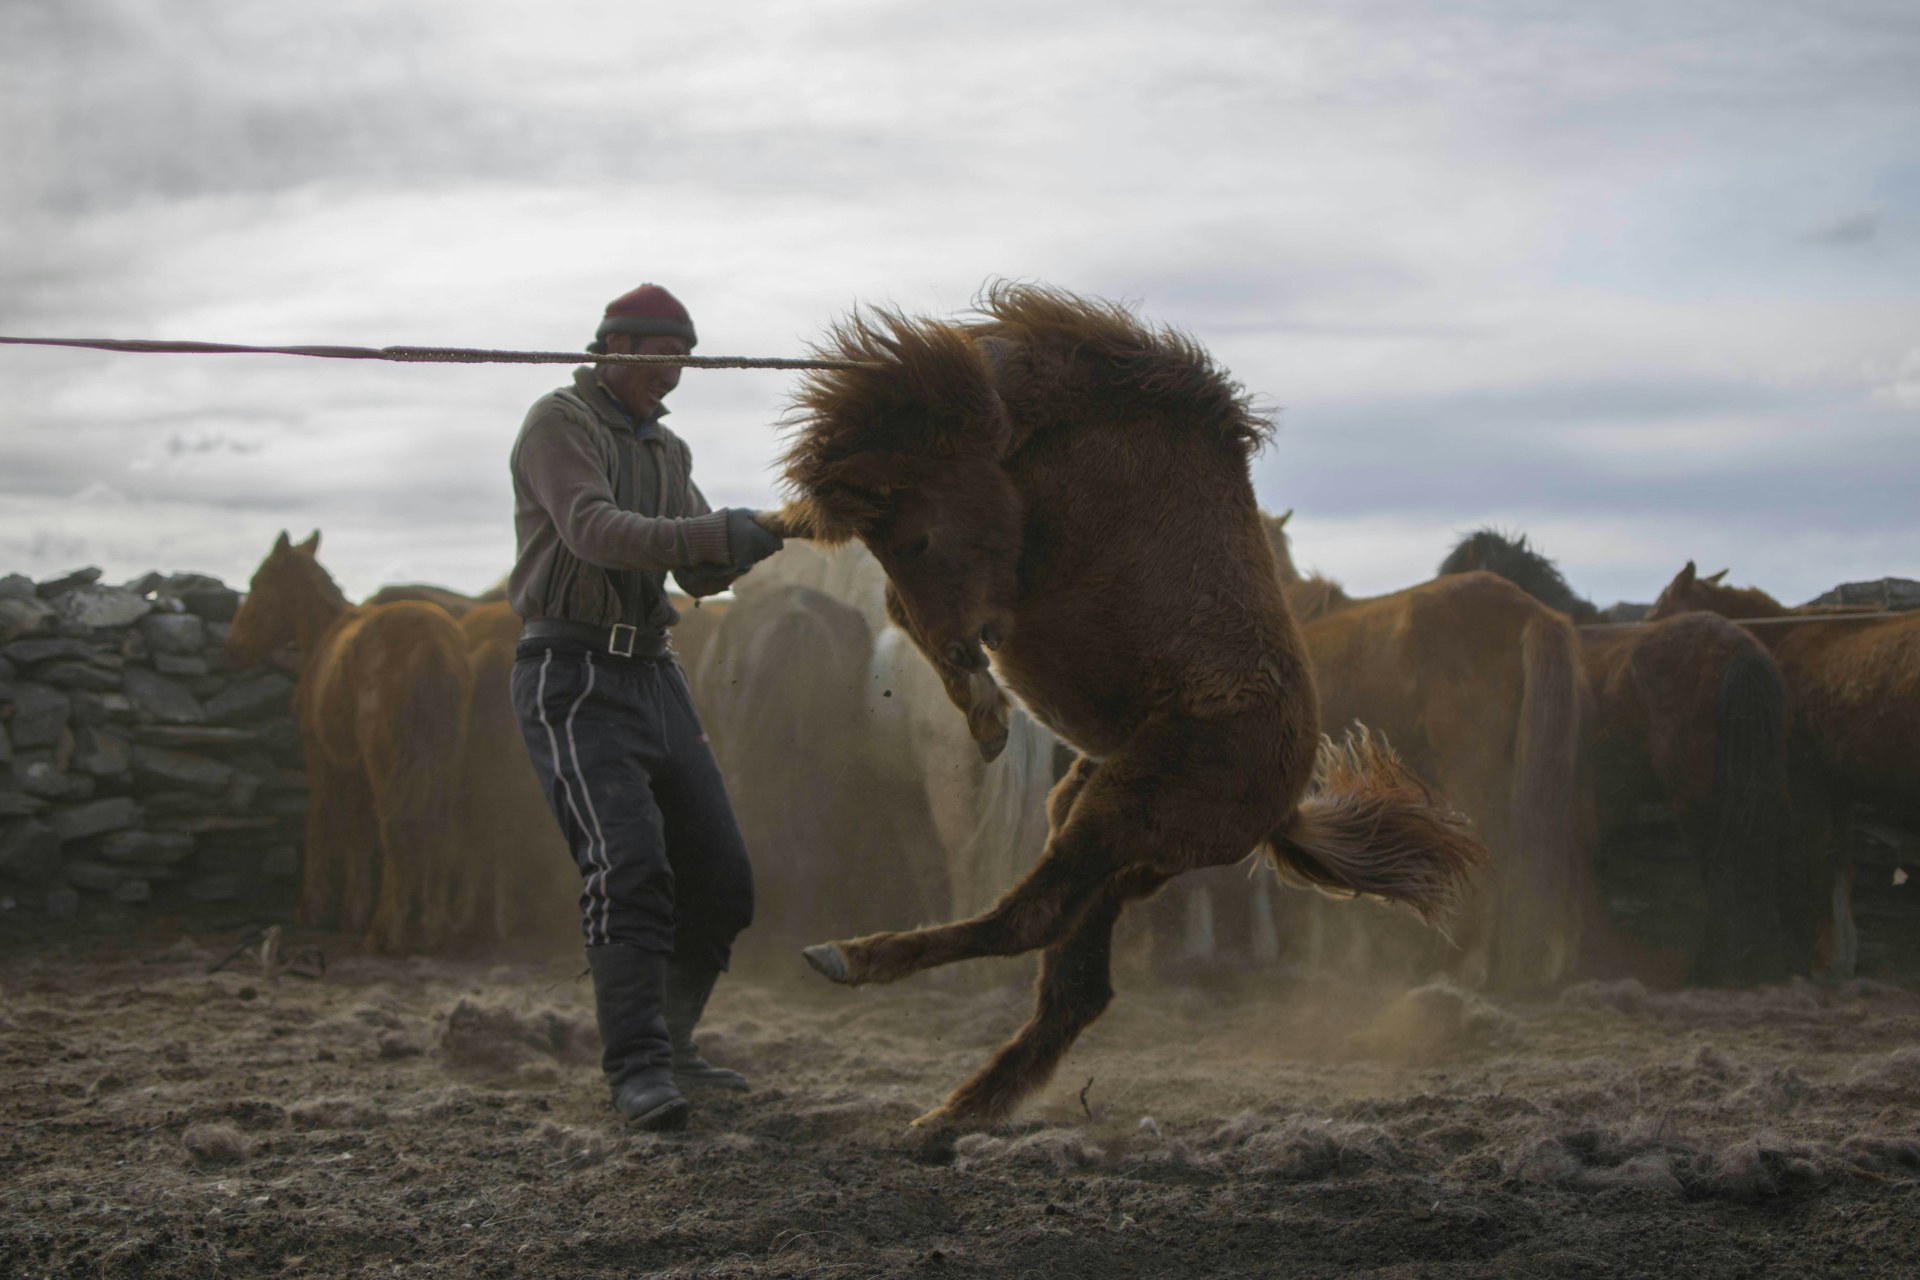 The Travel Diary: The Mongolian nomads wrestling with horses and the future